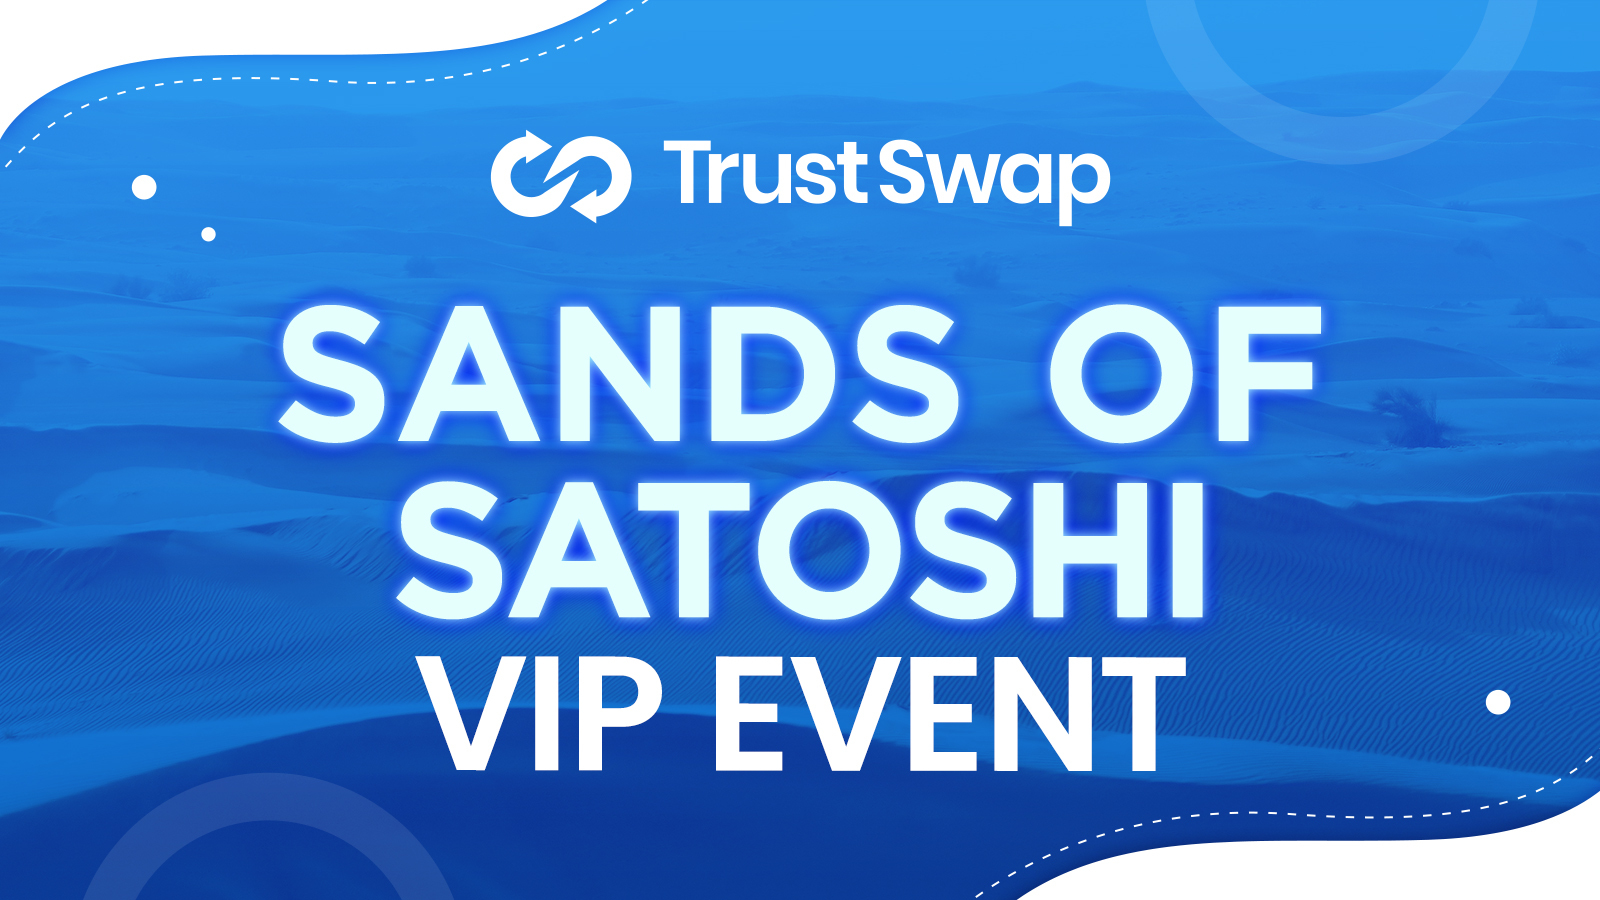 TrustSwap Team Invites VIPs To “Sands Of Satoshi” Conference in Dubai